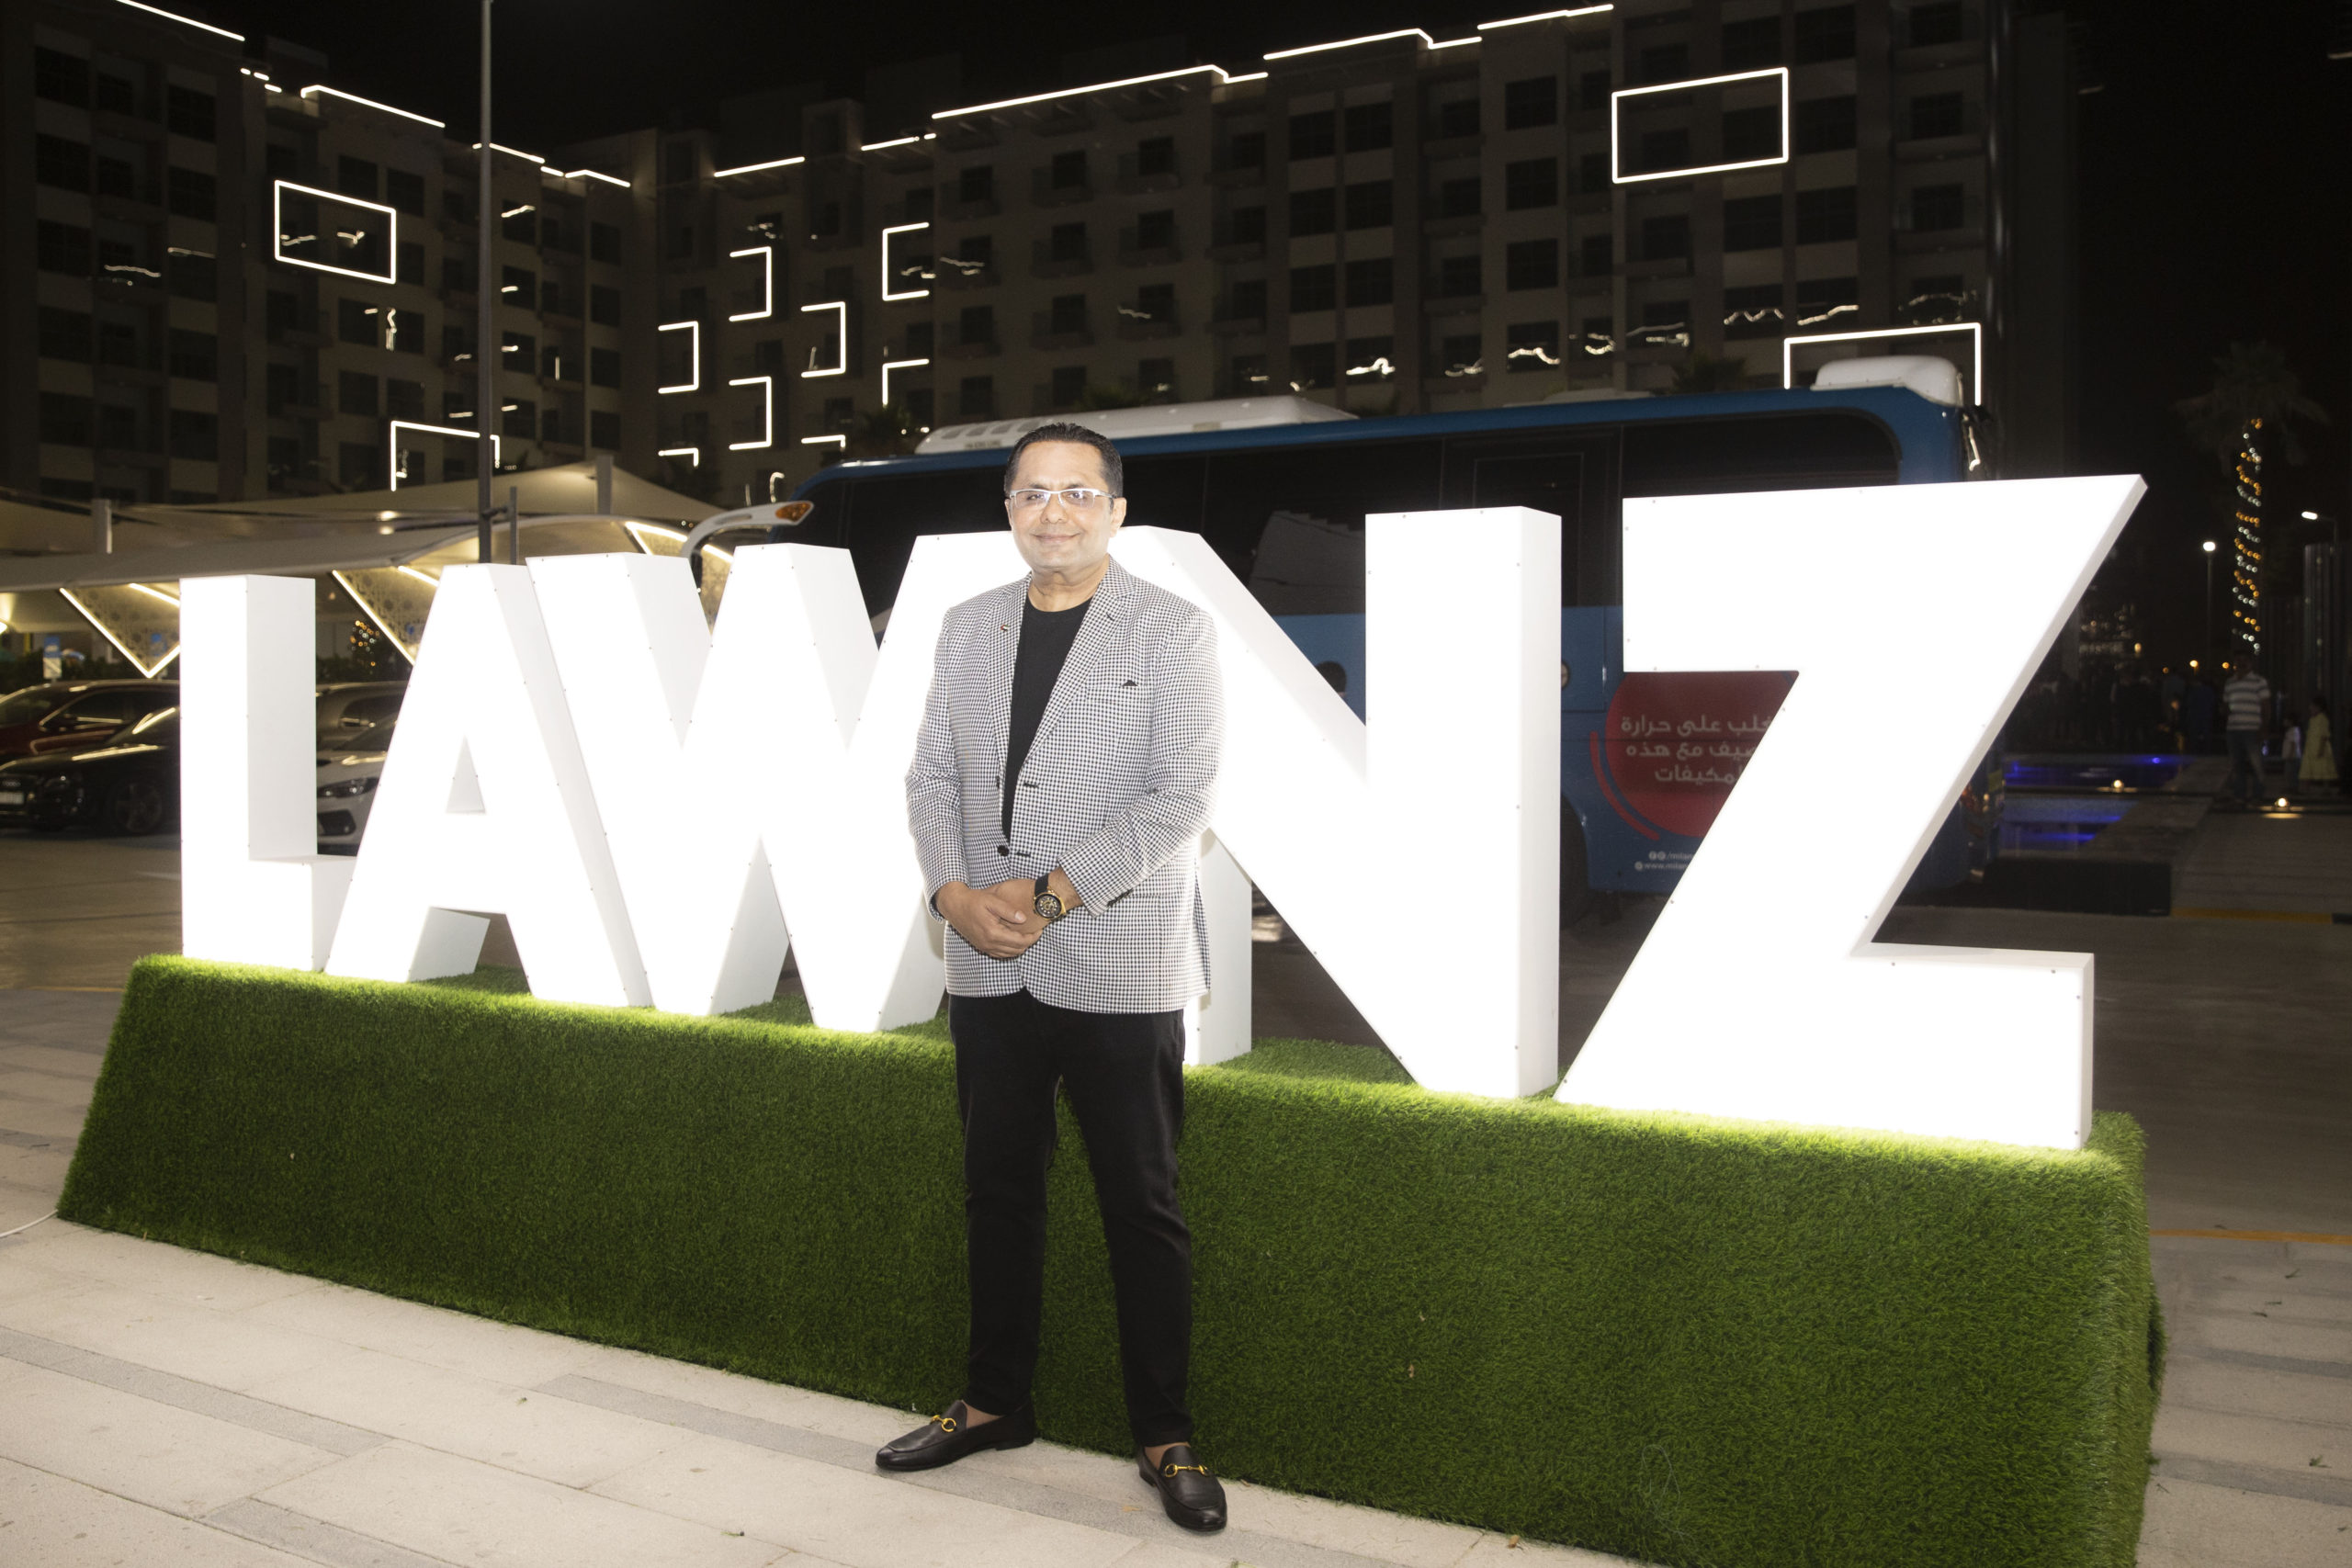 Danube Properties delivers the possession of its coveted Gated complex project ‘Lawnz’